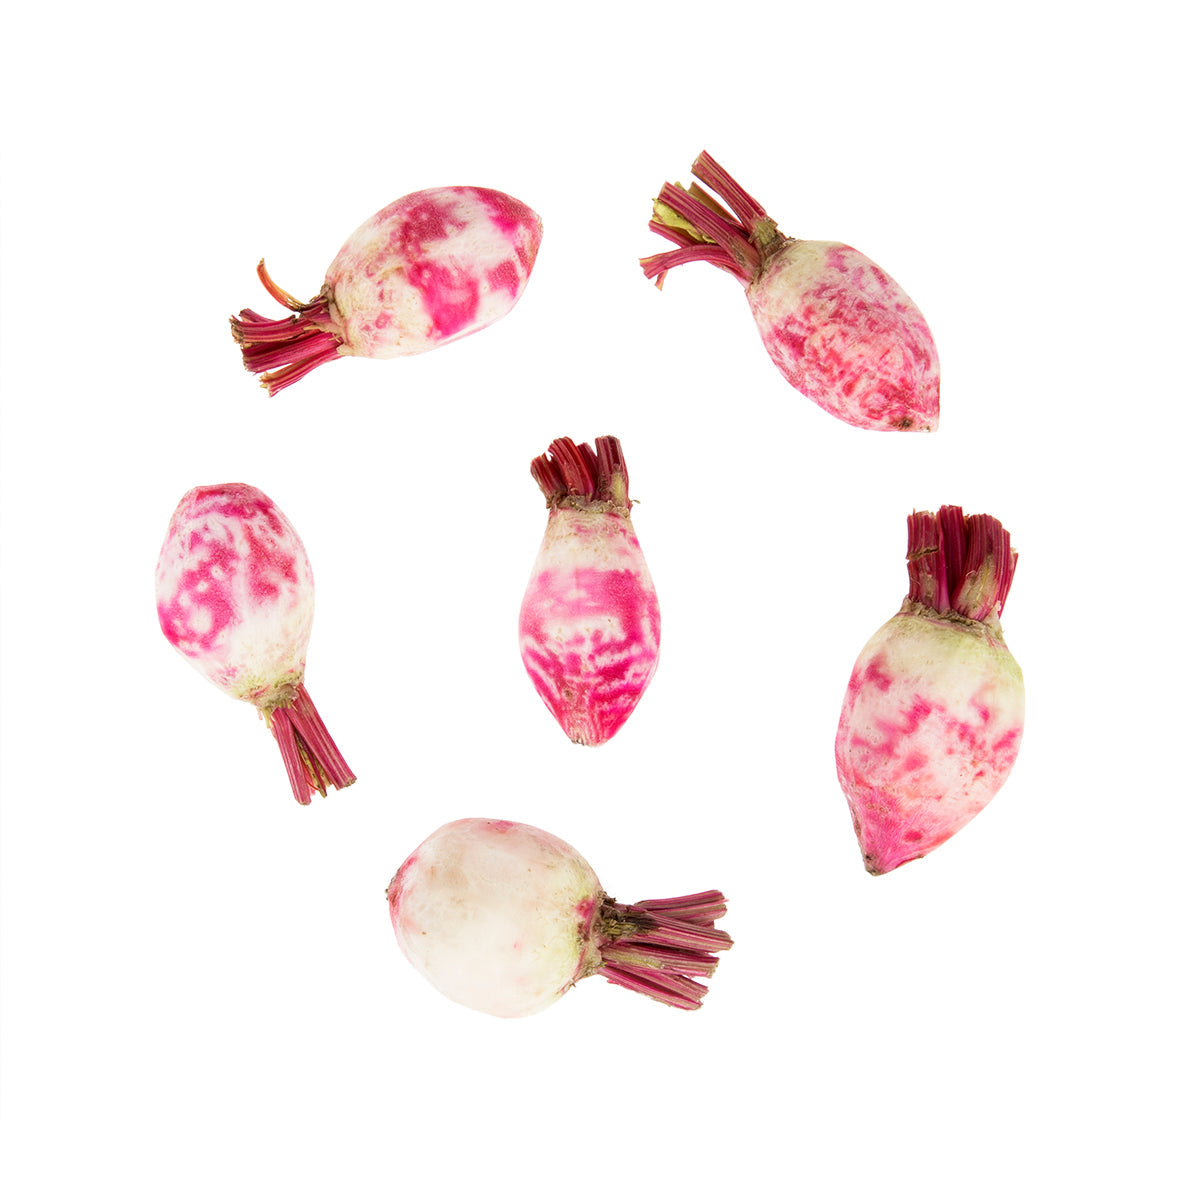 BoxNCase Peeled Baby Candy Beets